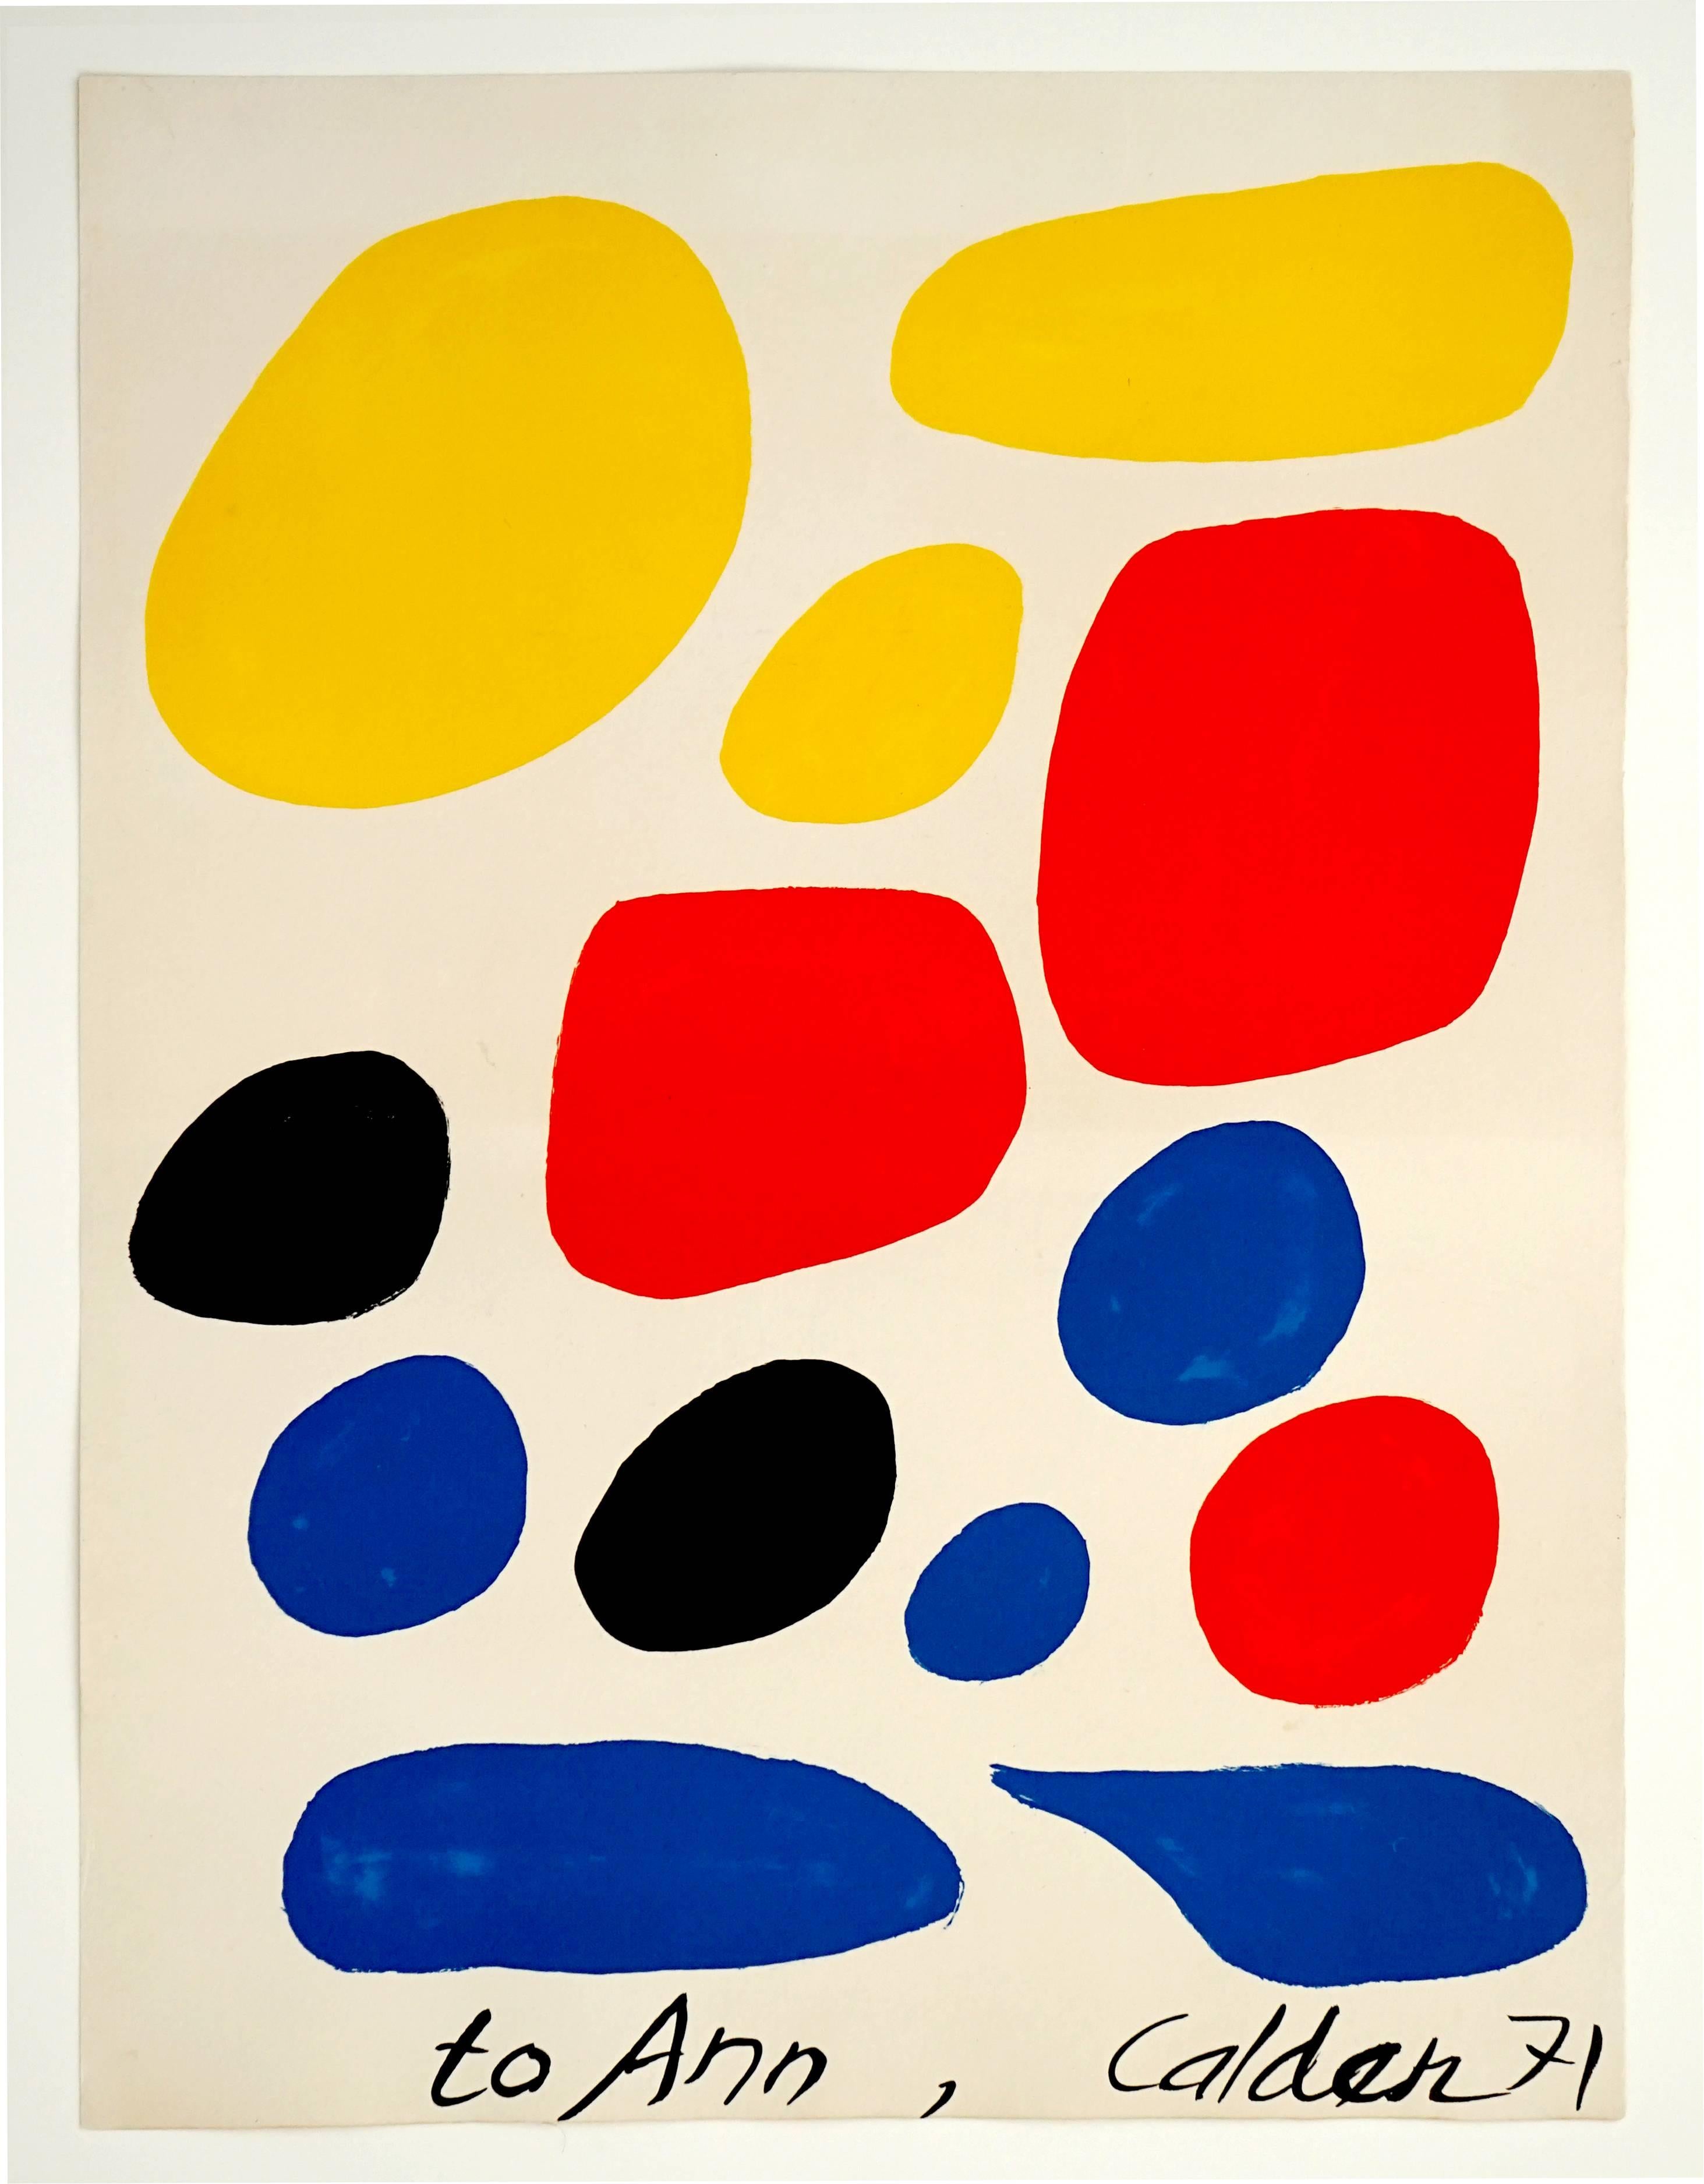 Untitled, Paris, 1971 (from the Deluxe Edition of Flight Portfolio, 1971) - Print by Alexander Calder